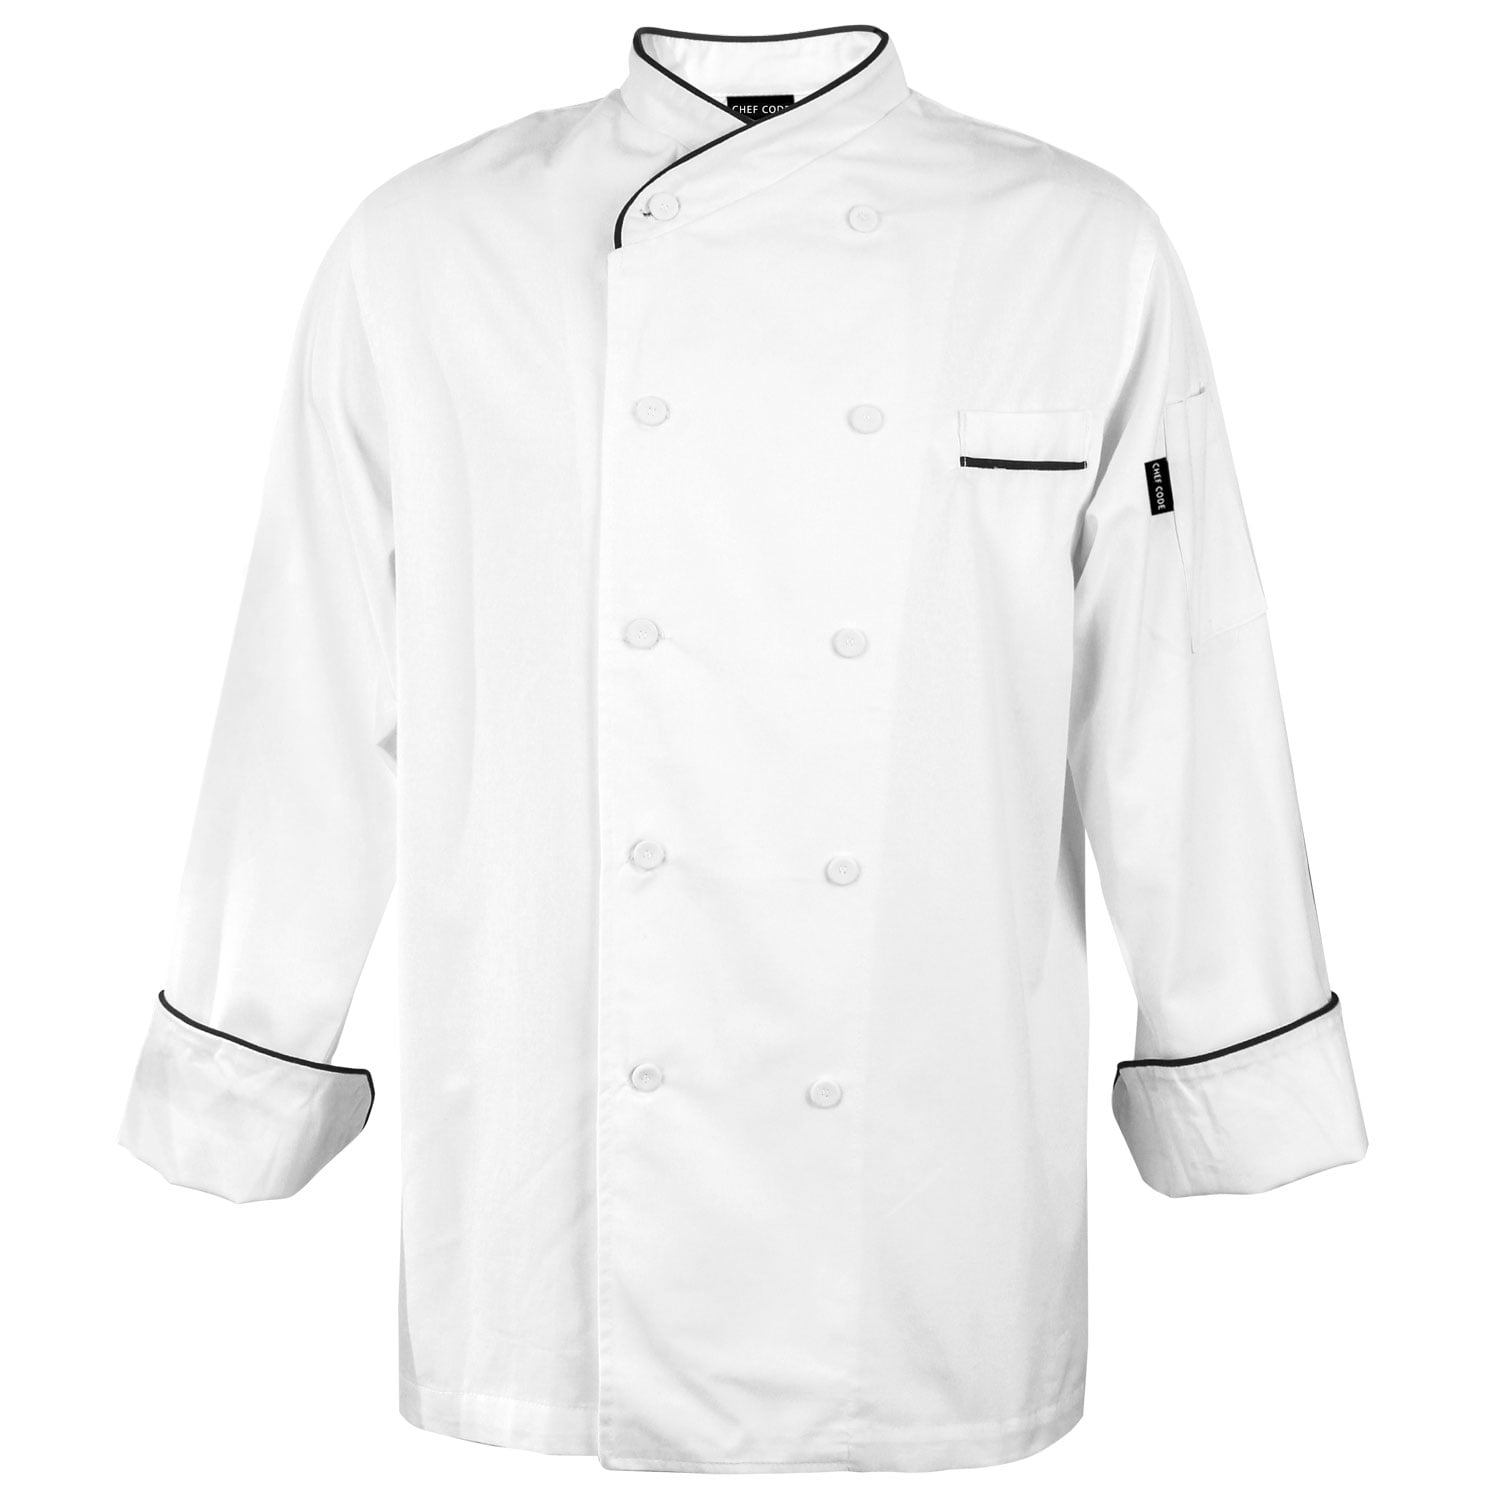 Women’s Chef Coat with Piping – Tailored Chef Coat with Fabric Covered Buttons XS-3X, 9 Colors